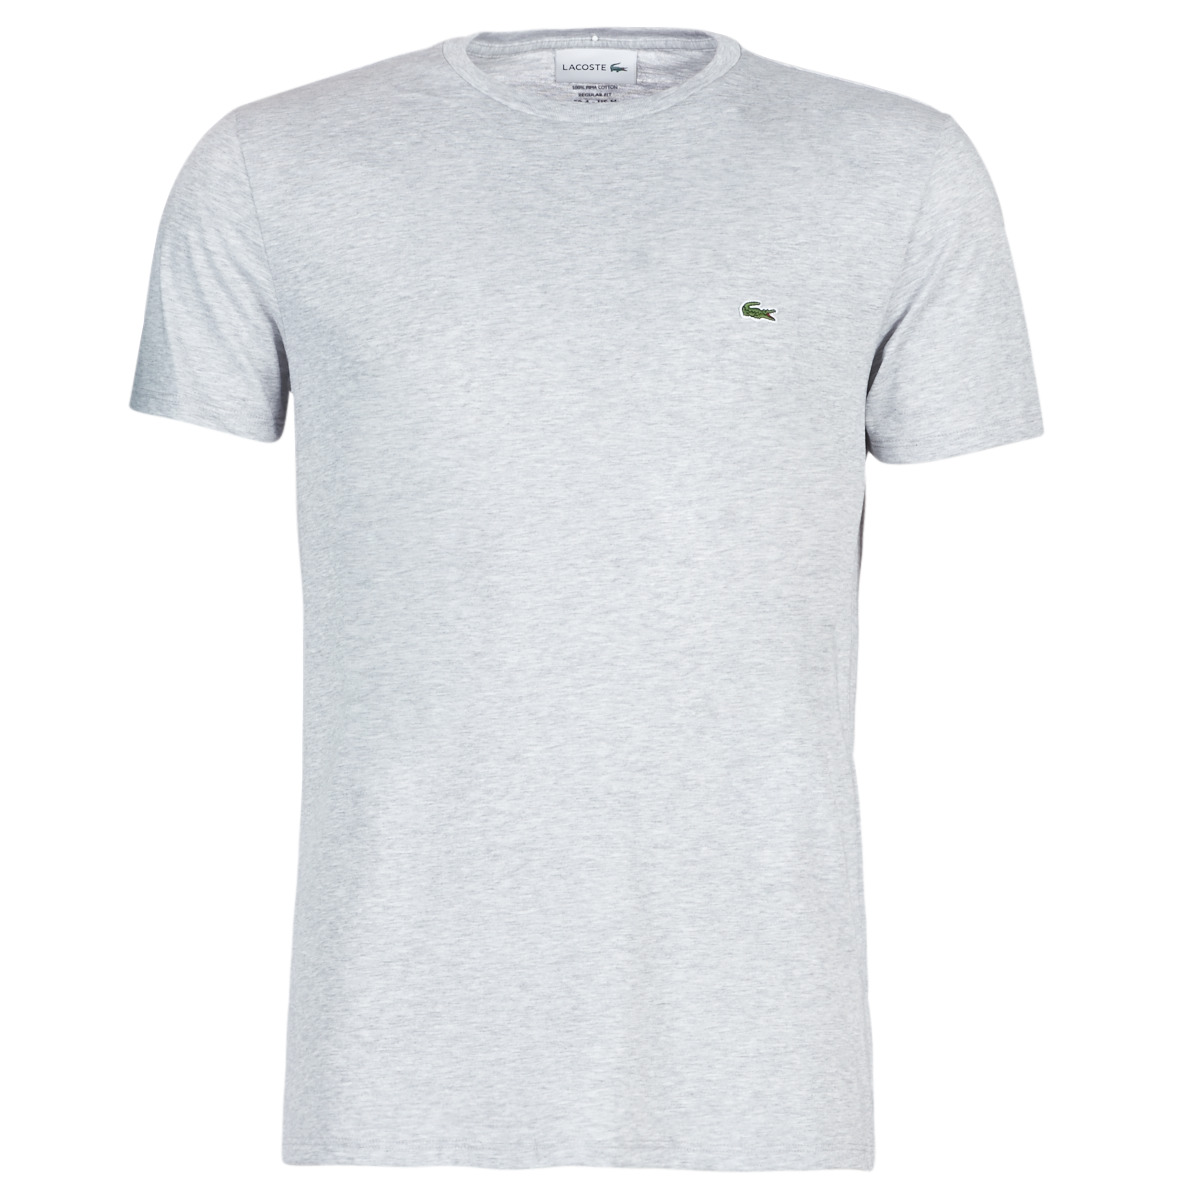 Lacoste TH6709 Grey - Fast delivery 